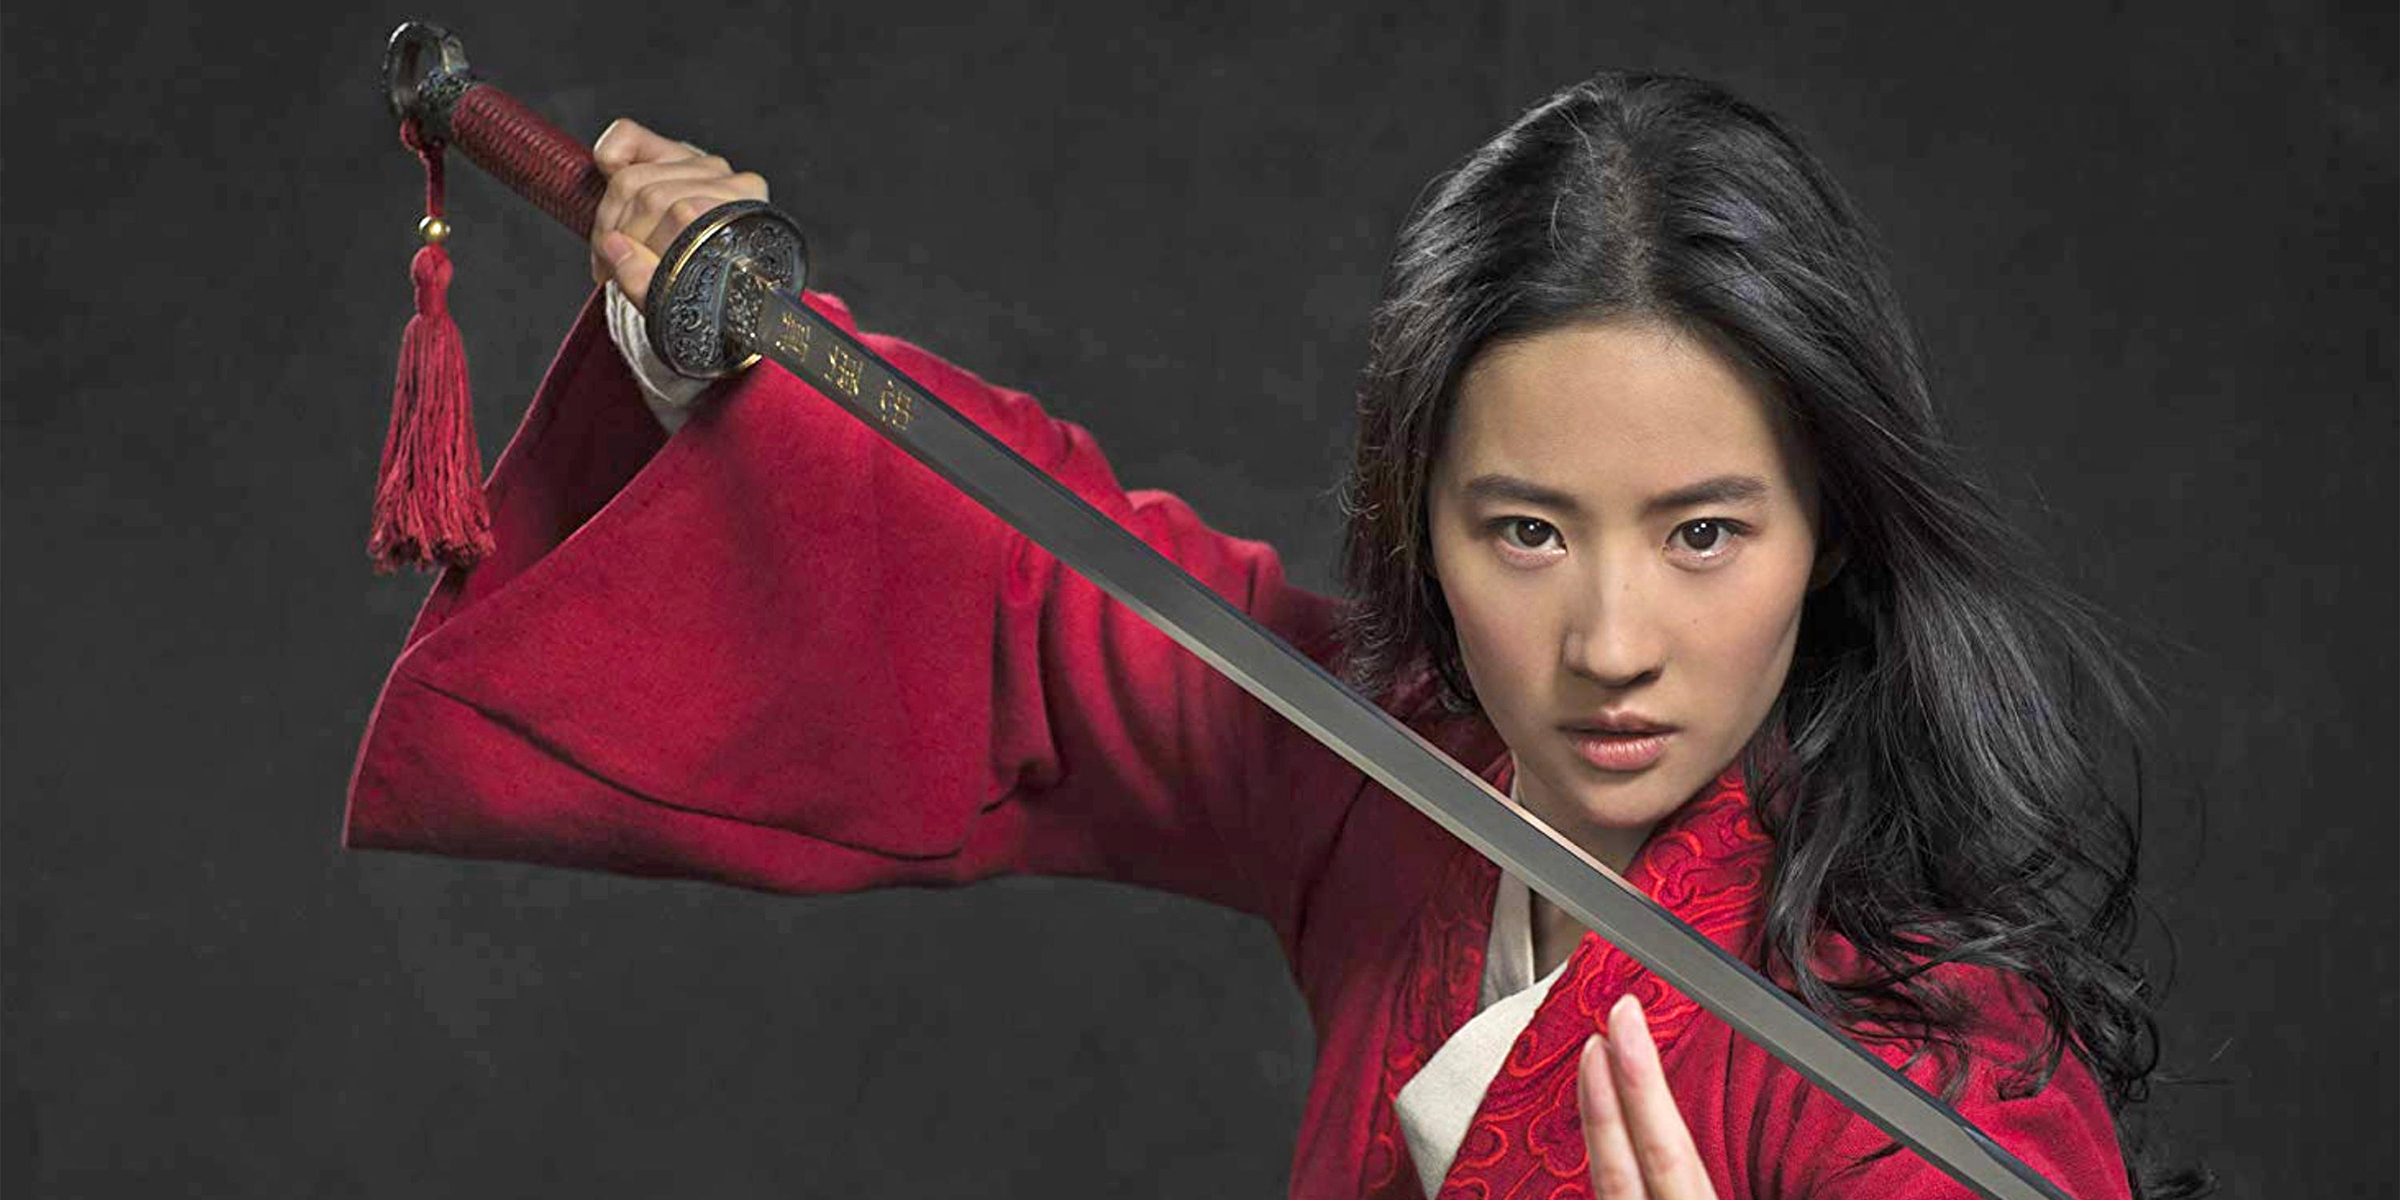 Why do Chinese people dislike “Mulan” so much?